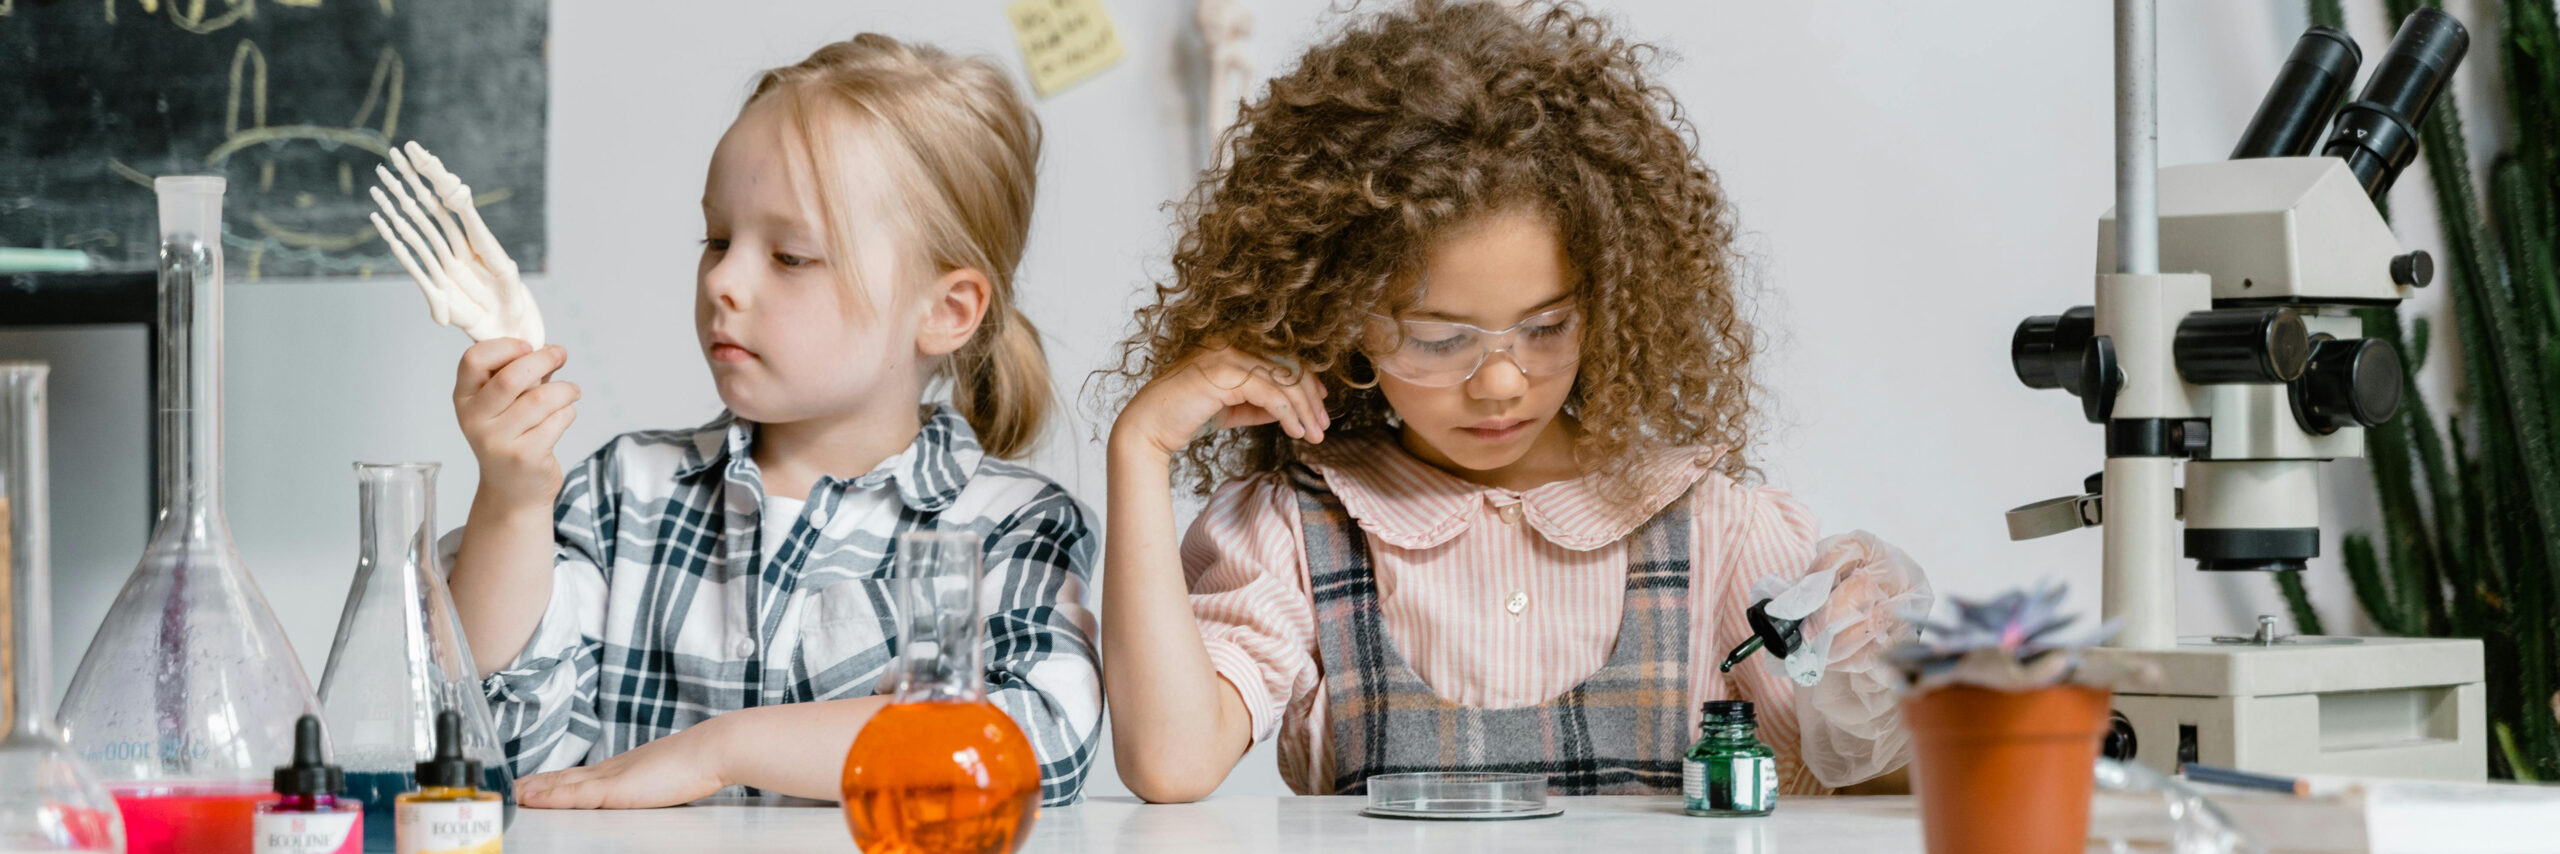 young girls doing science